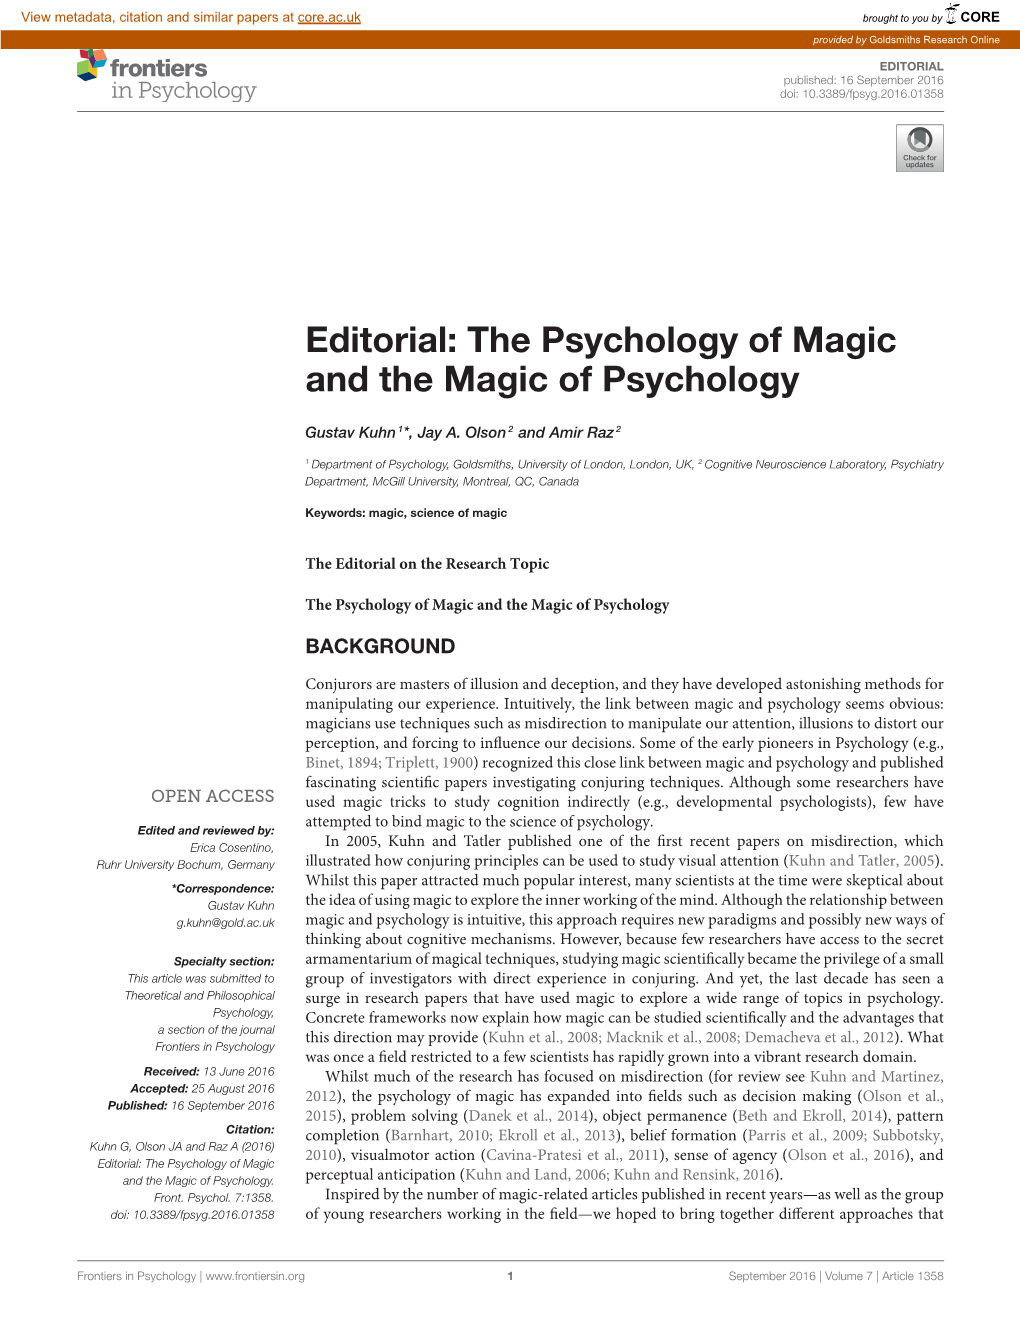 Editorial: the Psychology of Magic and the Magic of Psychology